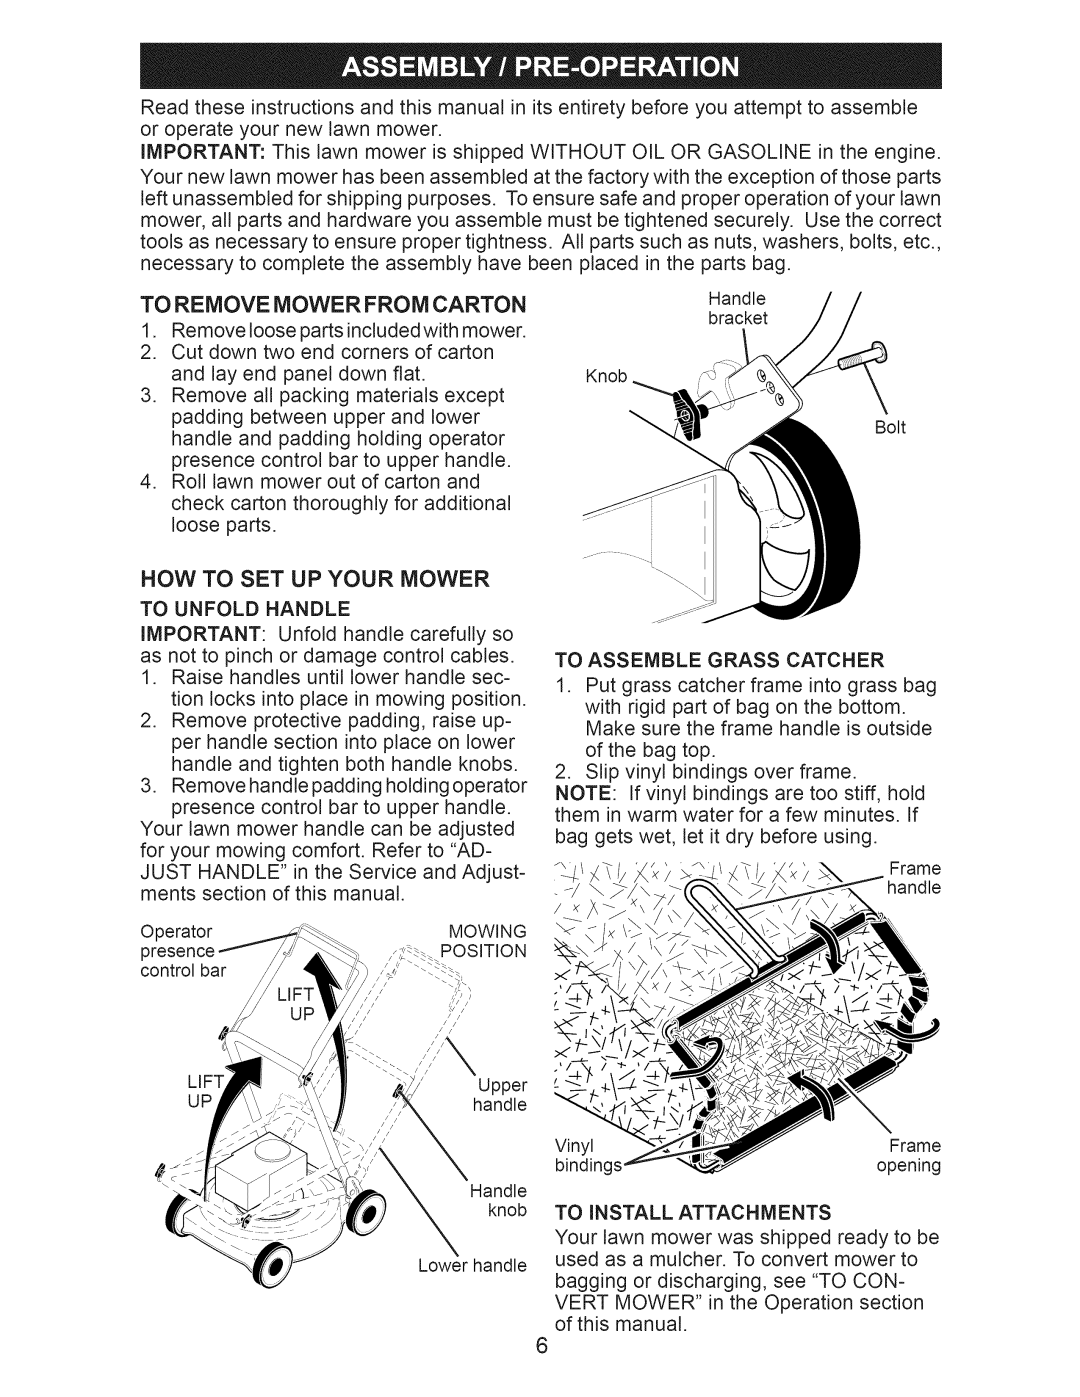 Craftsman 917.374042 owner manual To Remove Mower From Carton, Now To Set Up Your Mower 